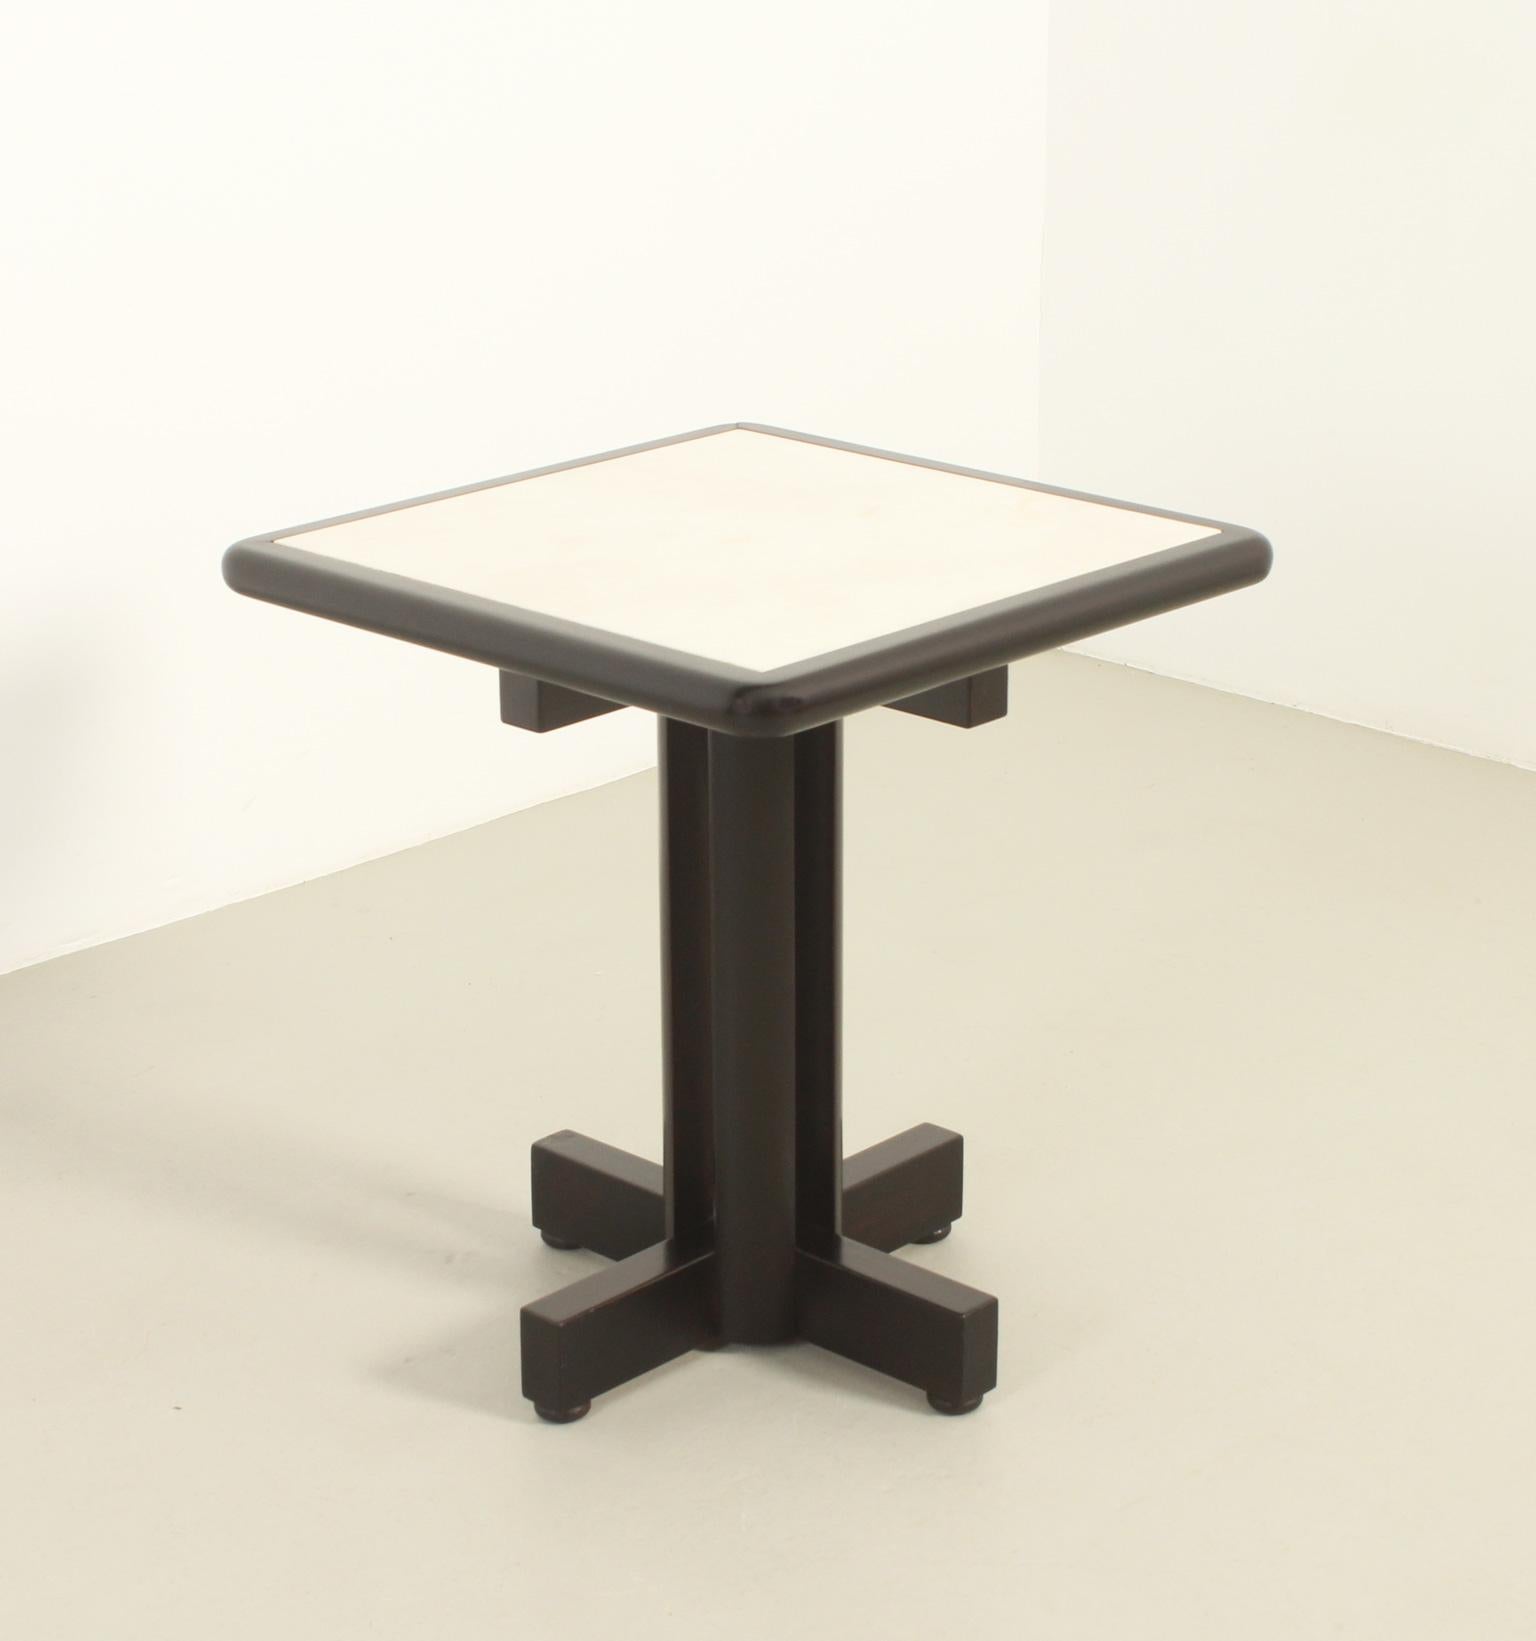 Fad table designed in 1973 by Miguel Milá for the FAD (Fomento Artes Decorativas) Café in Barcelona and produced by Gres, Spain. Solid ukola wood with inlaid marble top.